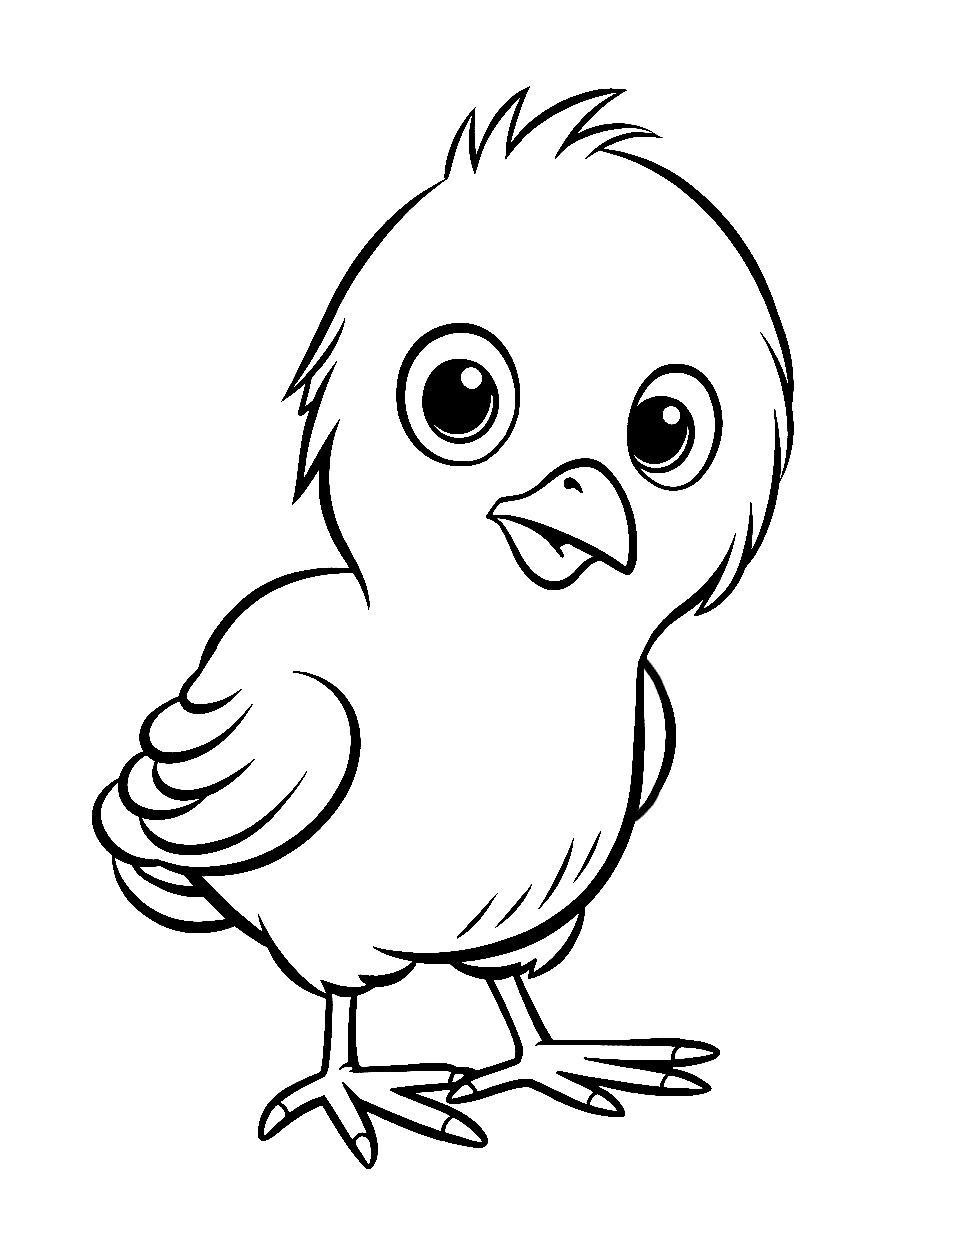 Baby Chick's First Steps Coloring Page - A tiny chick taking its first tentative steps.